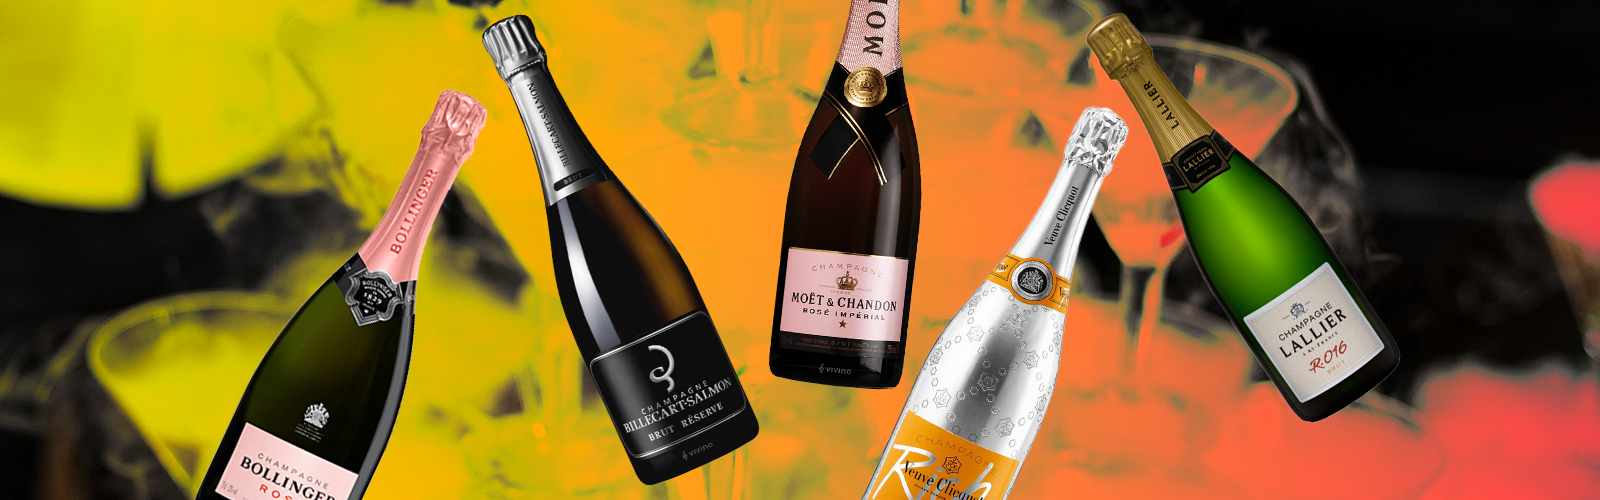 Champagne shortage 2021: Some higher-end brands like Moet and Chandon,  Veuve Clicquot sold out before New Year's Eve - ABC7 San Francisco